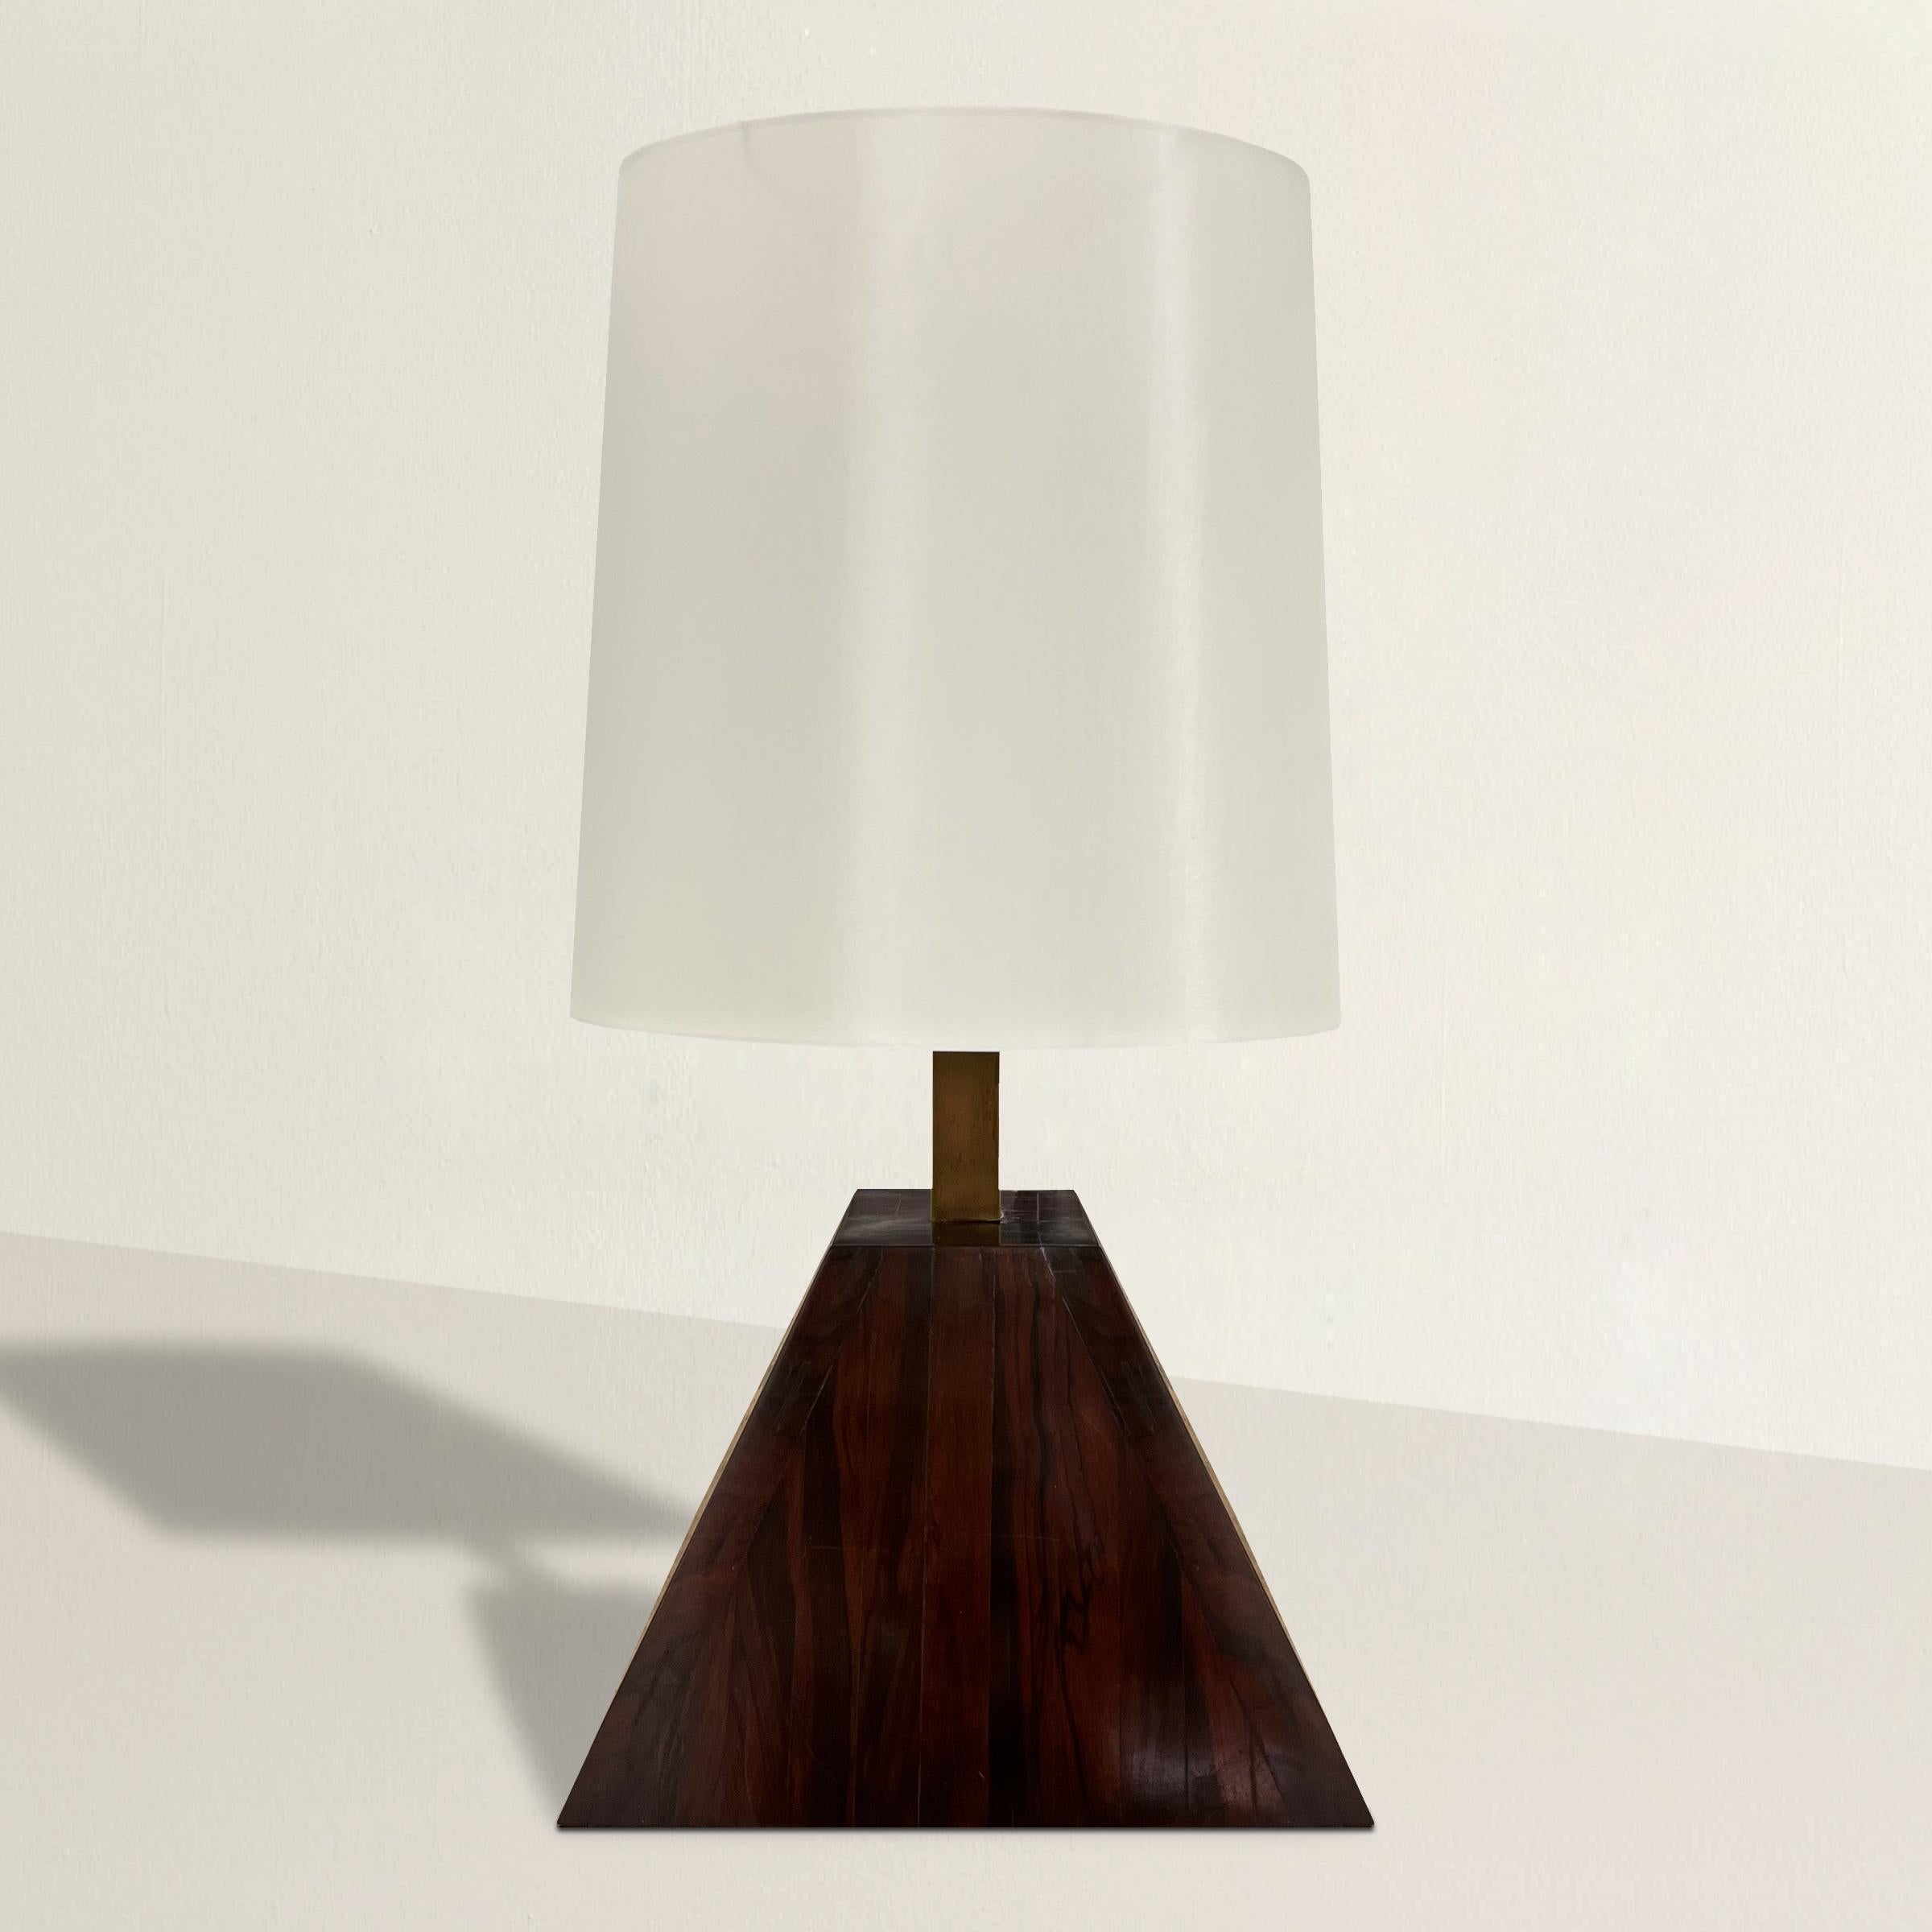 A rather large mid-20th century Italian table lamp designed by Italian designer Romeo Rega, with a pyramidal-form teak wood base with a brass stem supporting a tapered oval silk shade. The scale is pretty impressive!